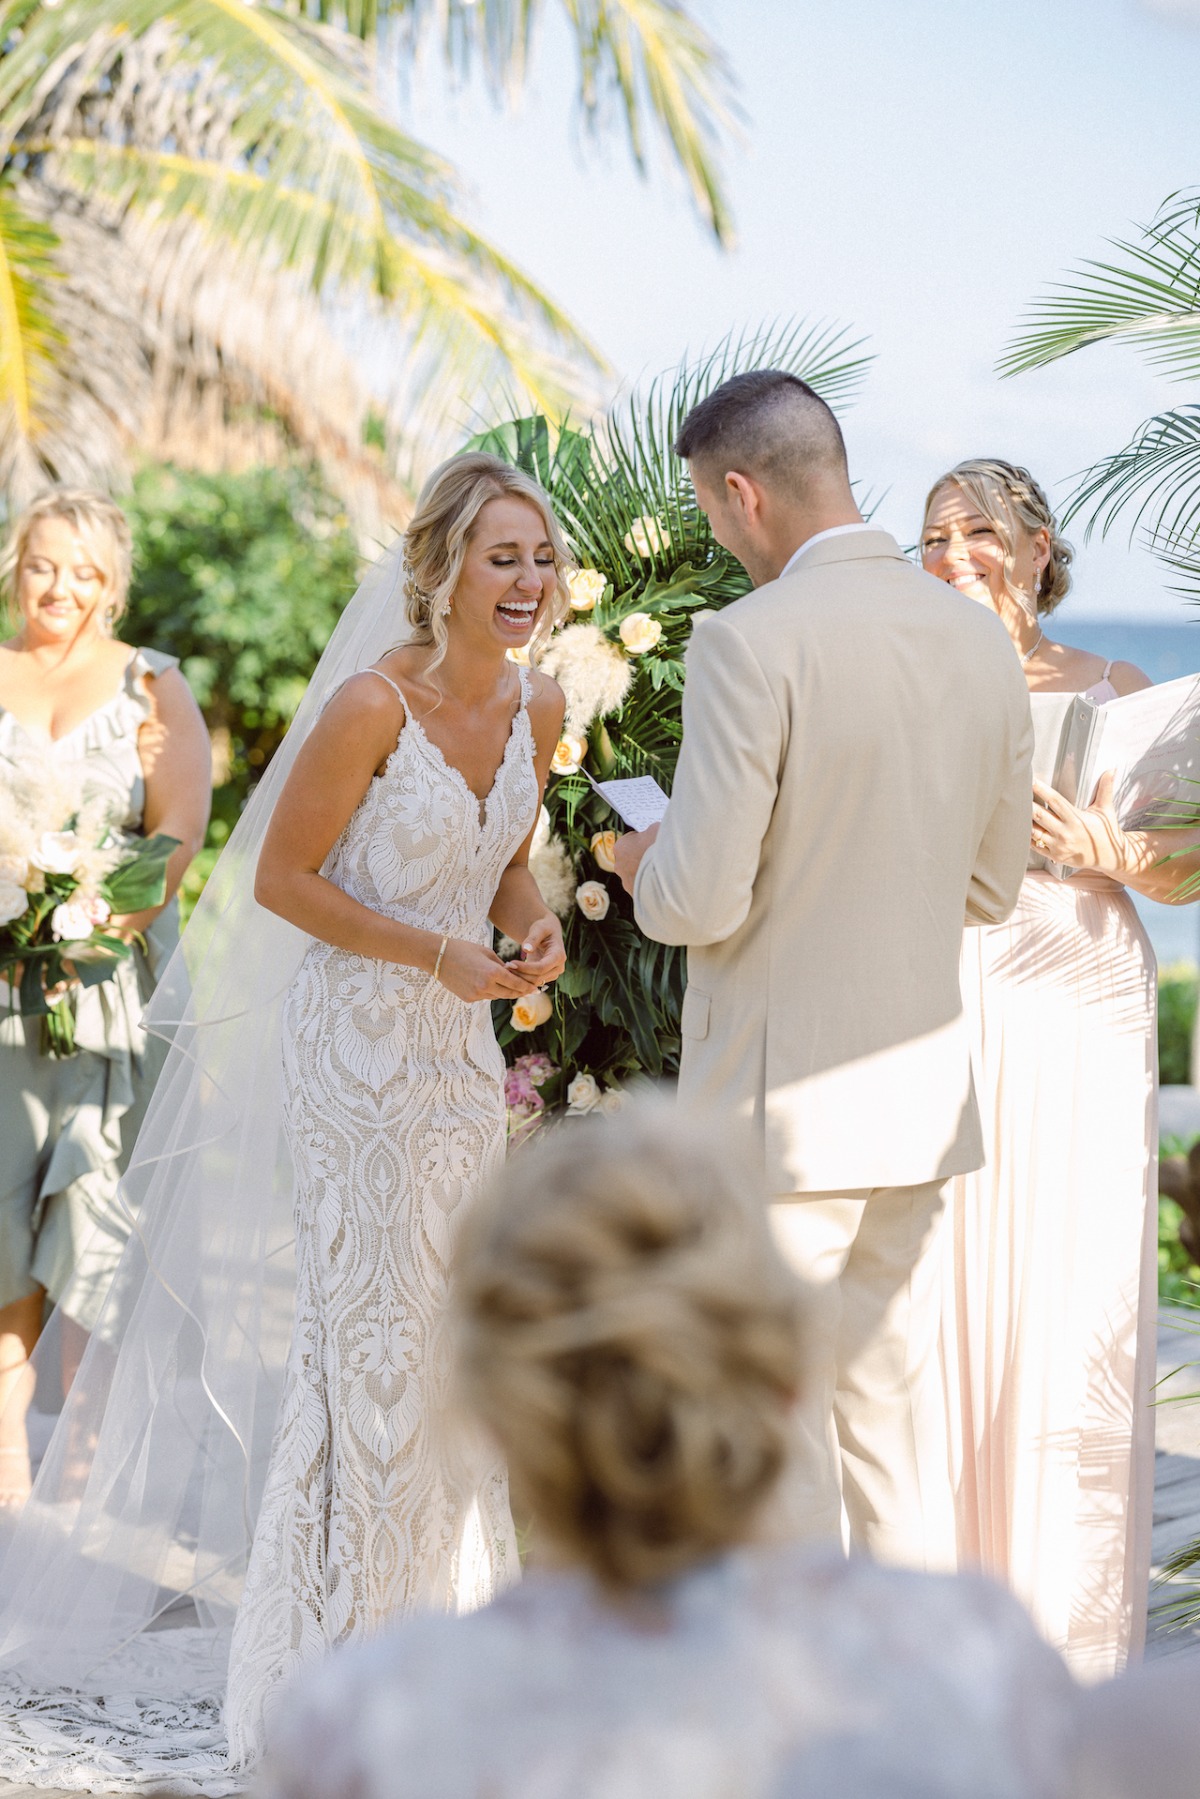 Beachy, Bohemian Glamour in the Riviera Maya at this 90-Person Destination Wedding